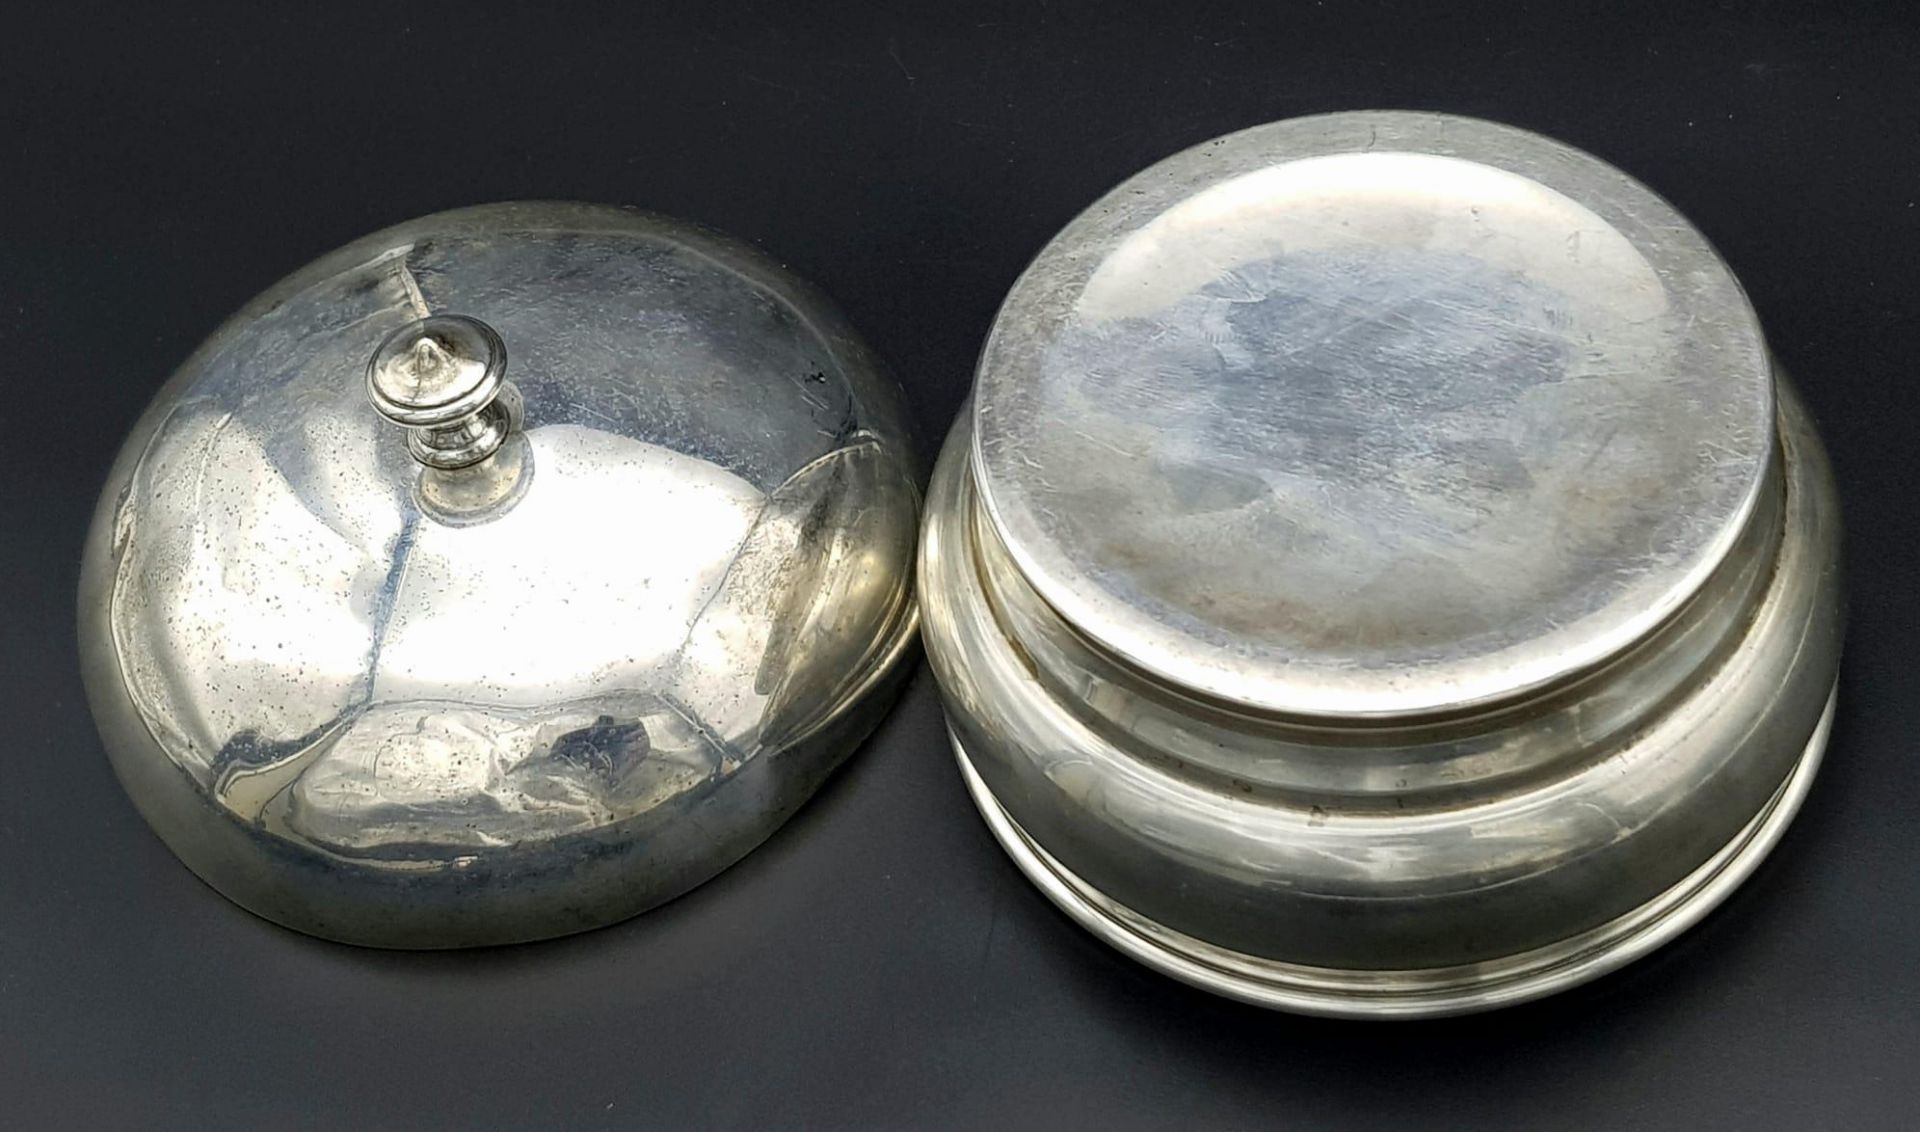 A SOLID SILVER TRINKET BOX IN THE SHAPE OF A SERVICE BELL . 164gms 11cms DIAMETER - Image 4 of 5